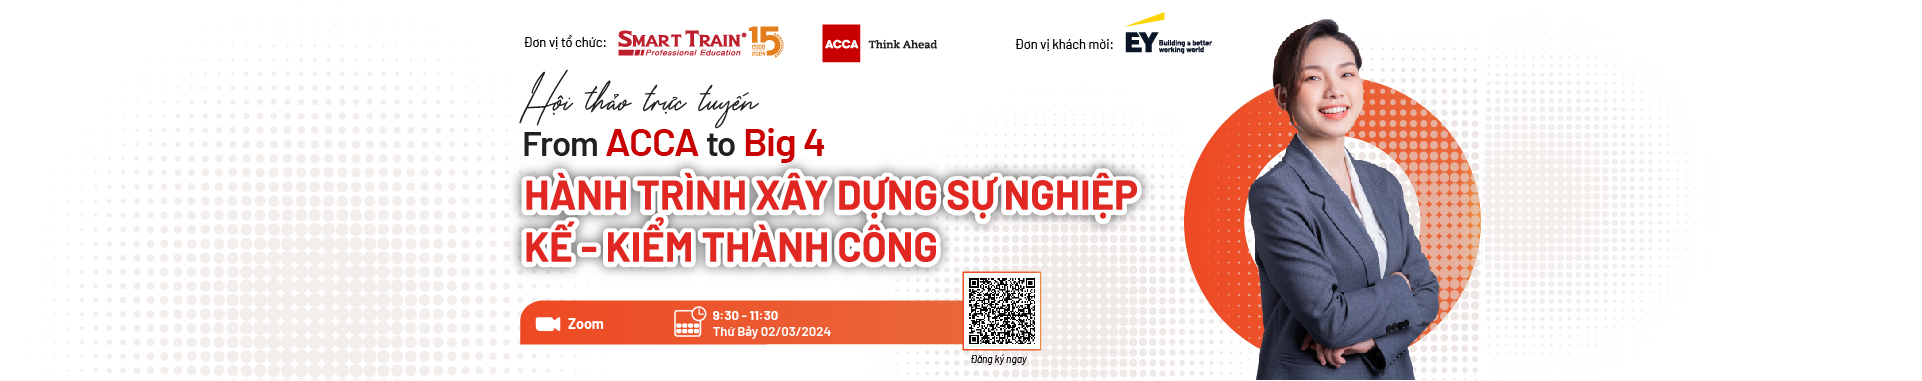 Hội thảo trực tuyến From ACCA to BIG4